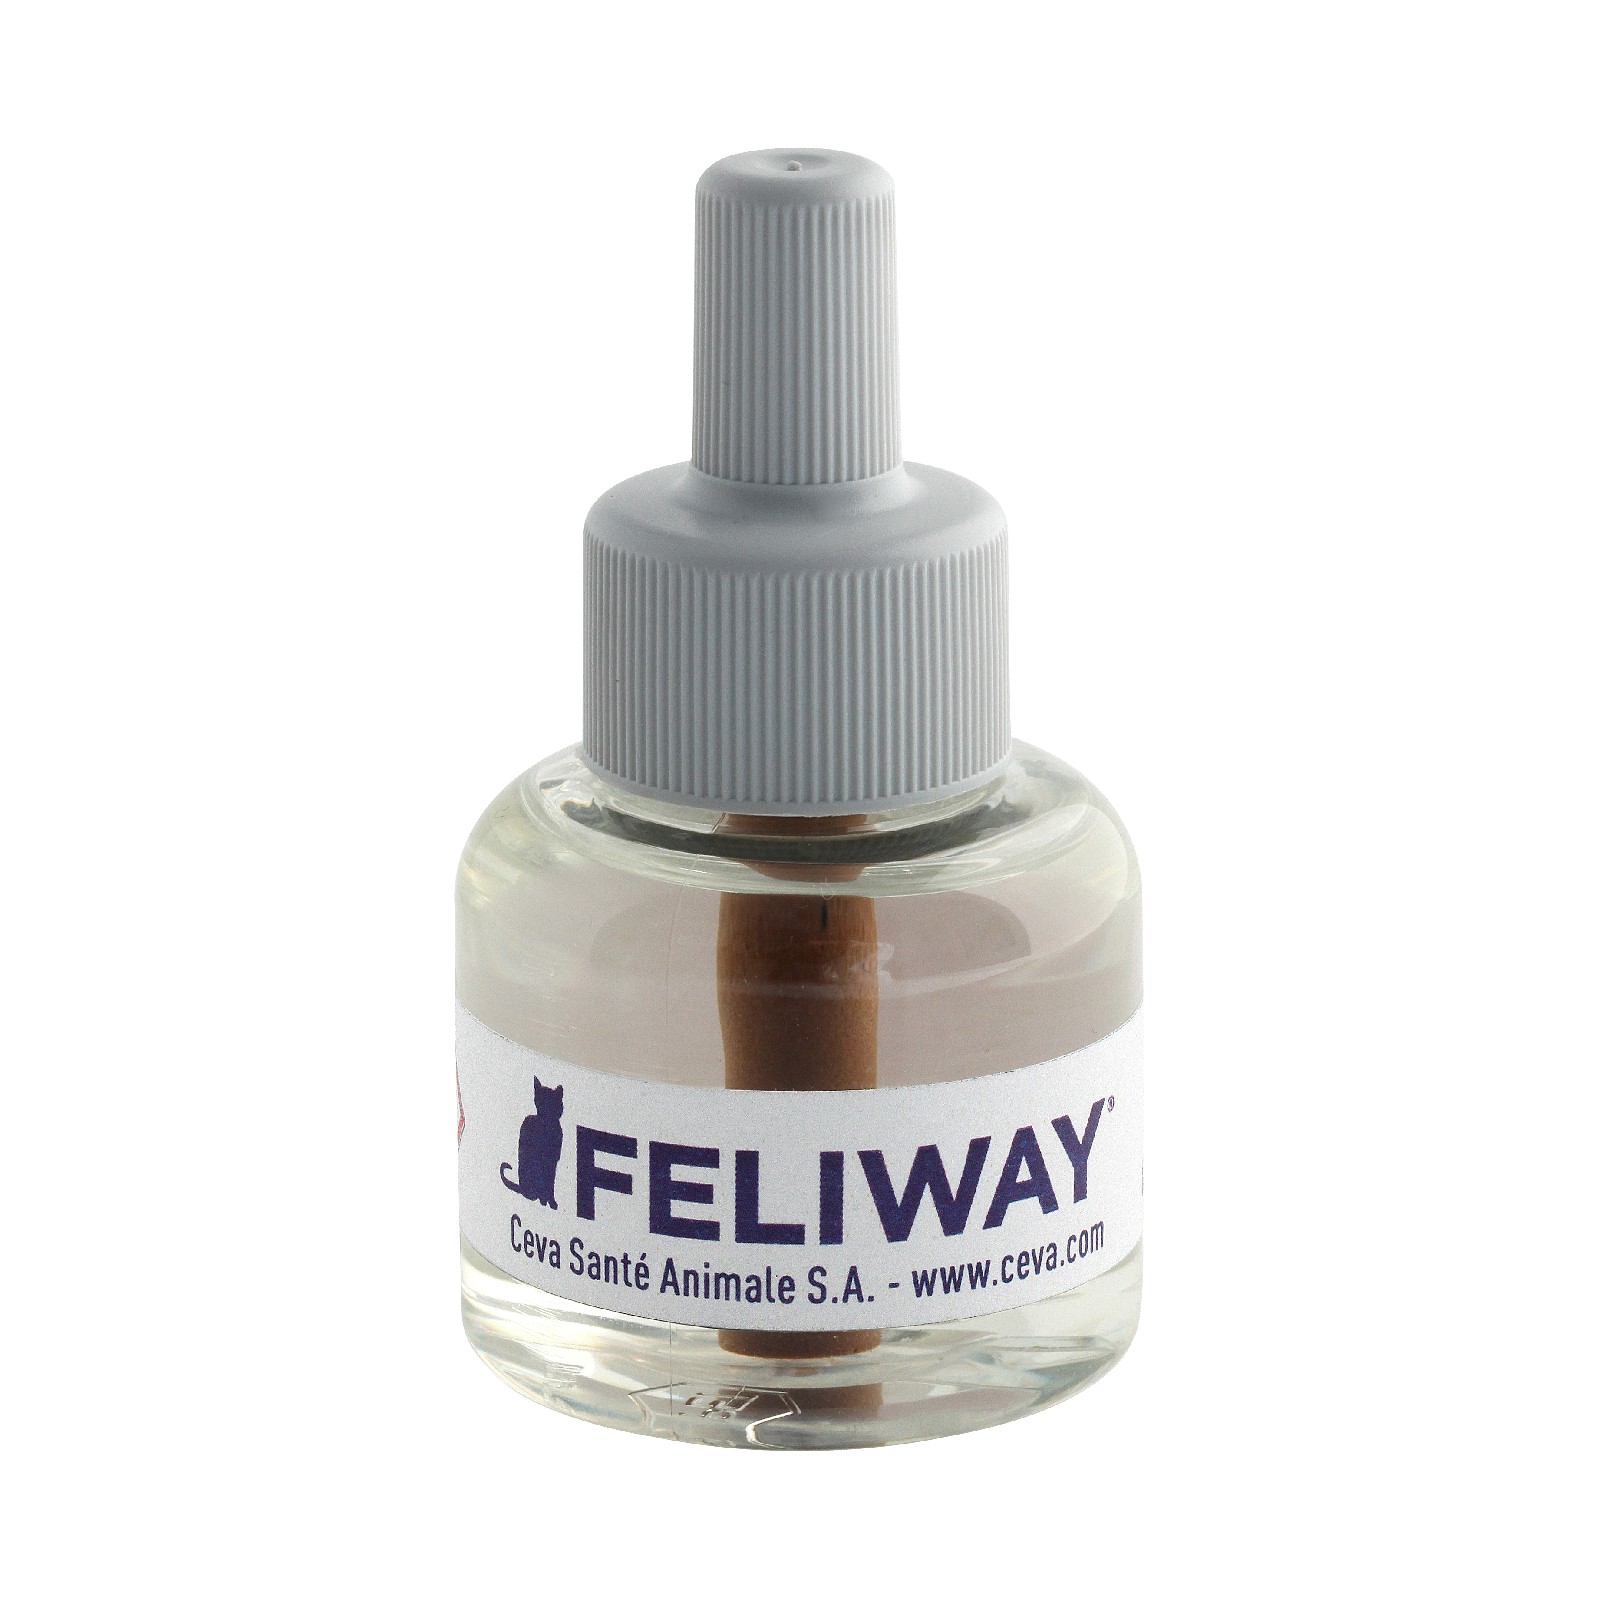 feliway diffuser afterpay